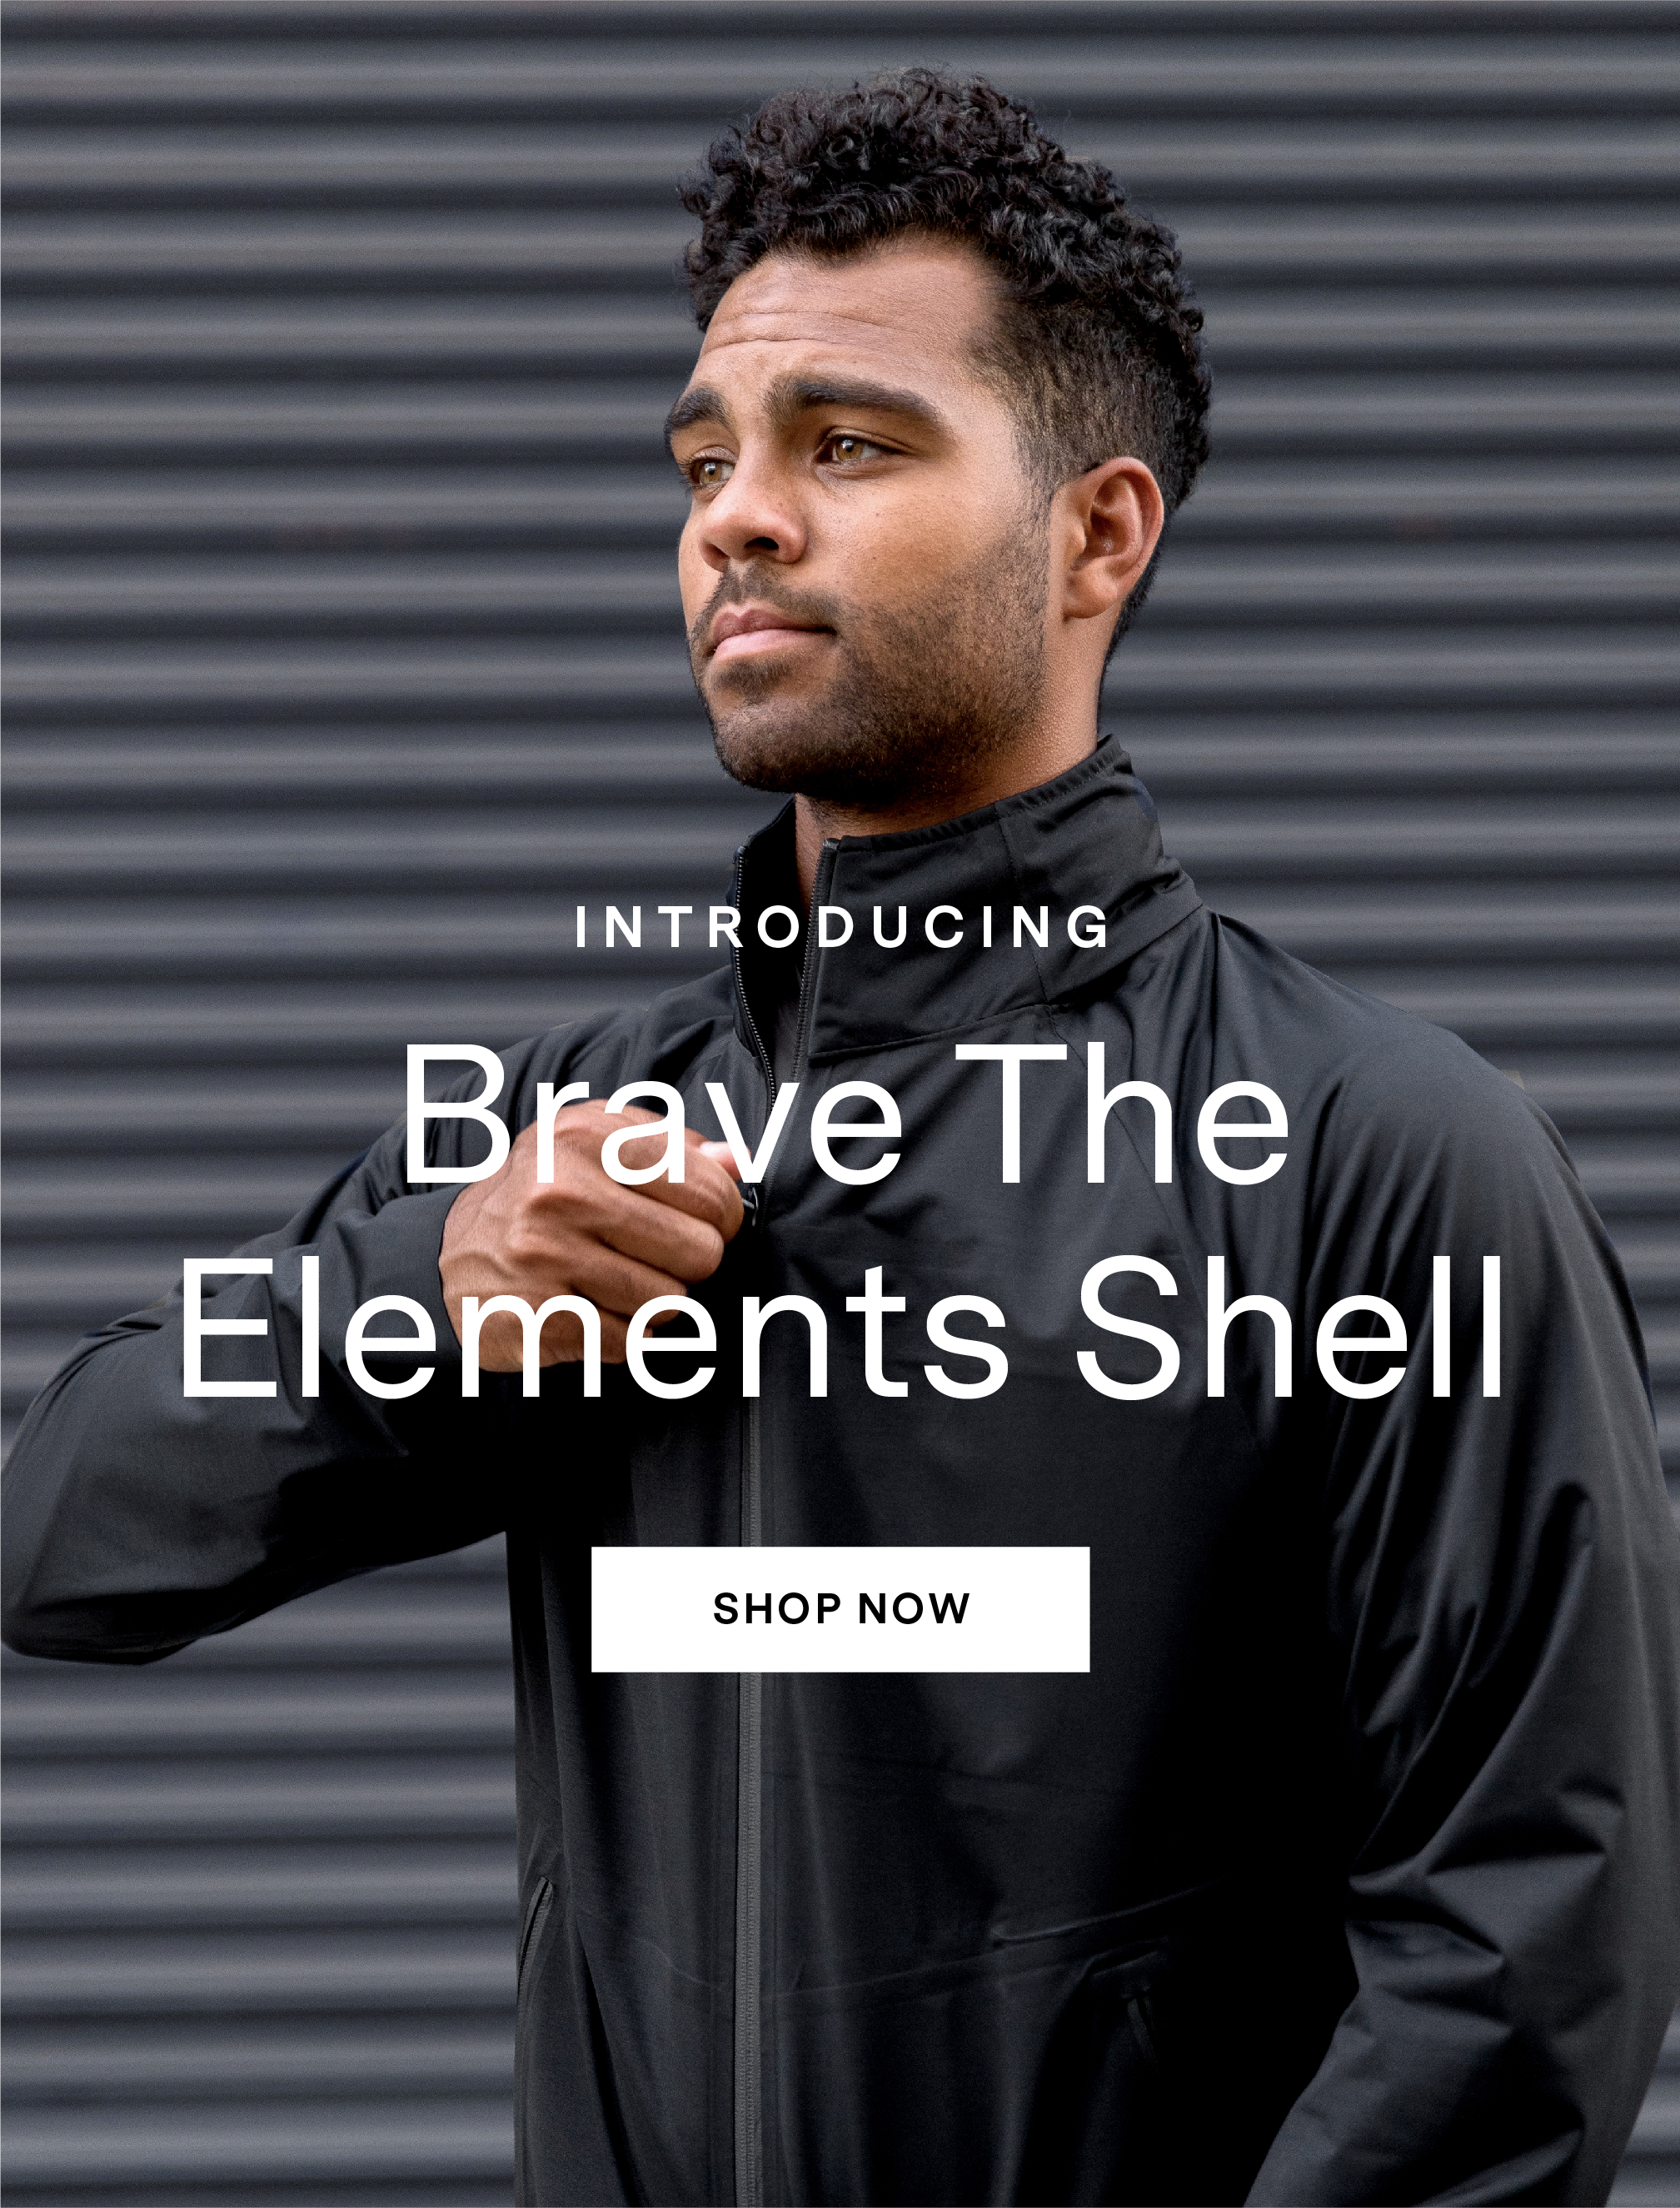  Introducing Brave The Elements Shell. Shop now